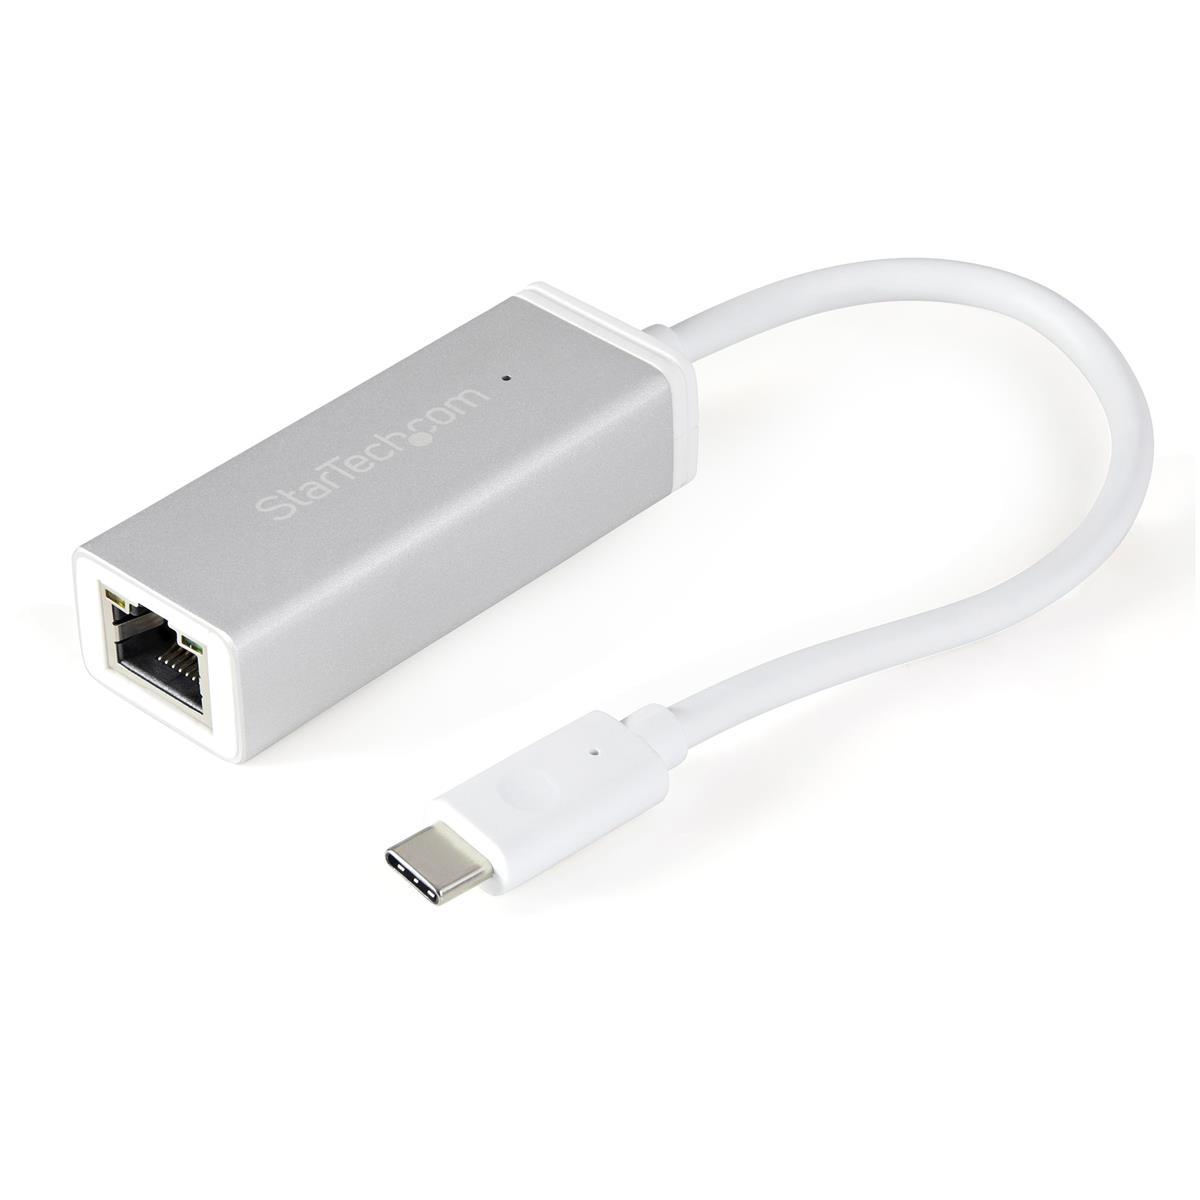 

StarTech Apple Style USB 3.0 Type C to Gigabit Ethernet Network Adapter, Silver